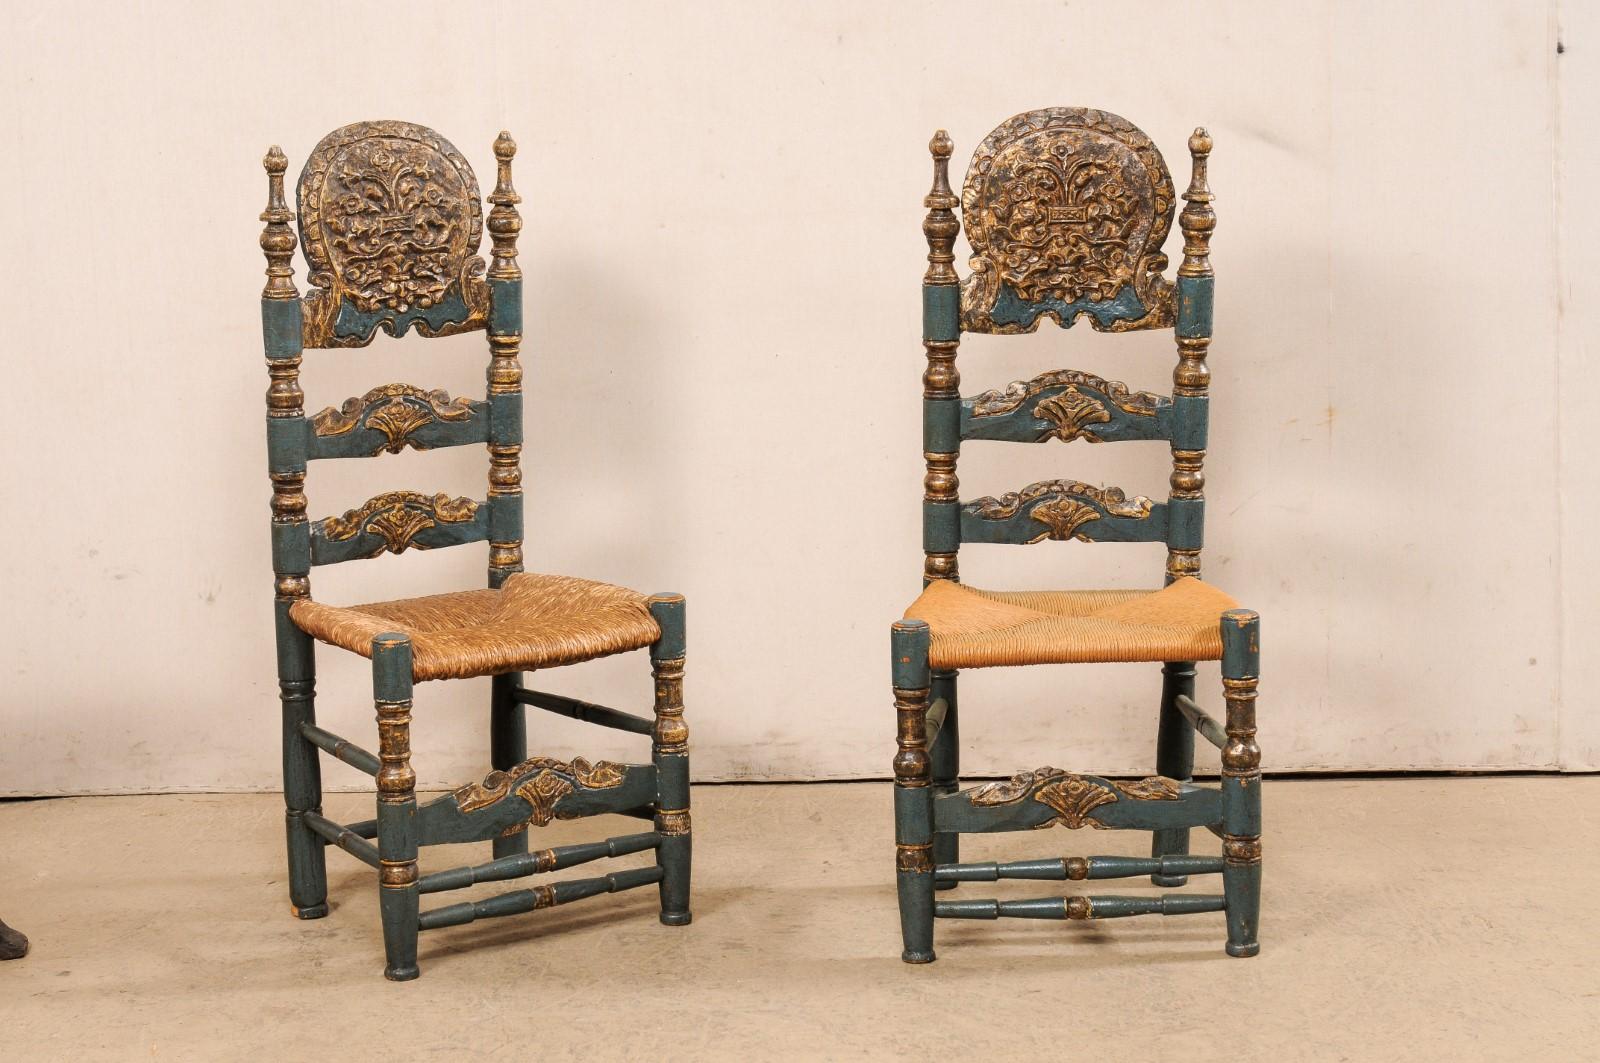 A Spanish pair of Spanish Colonial style, carved and painted wood ladder back chairs with rushed seats. This vintage pair of chairs from Spain, designed in 18th century Spanish Colonial style, have ornately-carved head rests atop a high open and